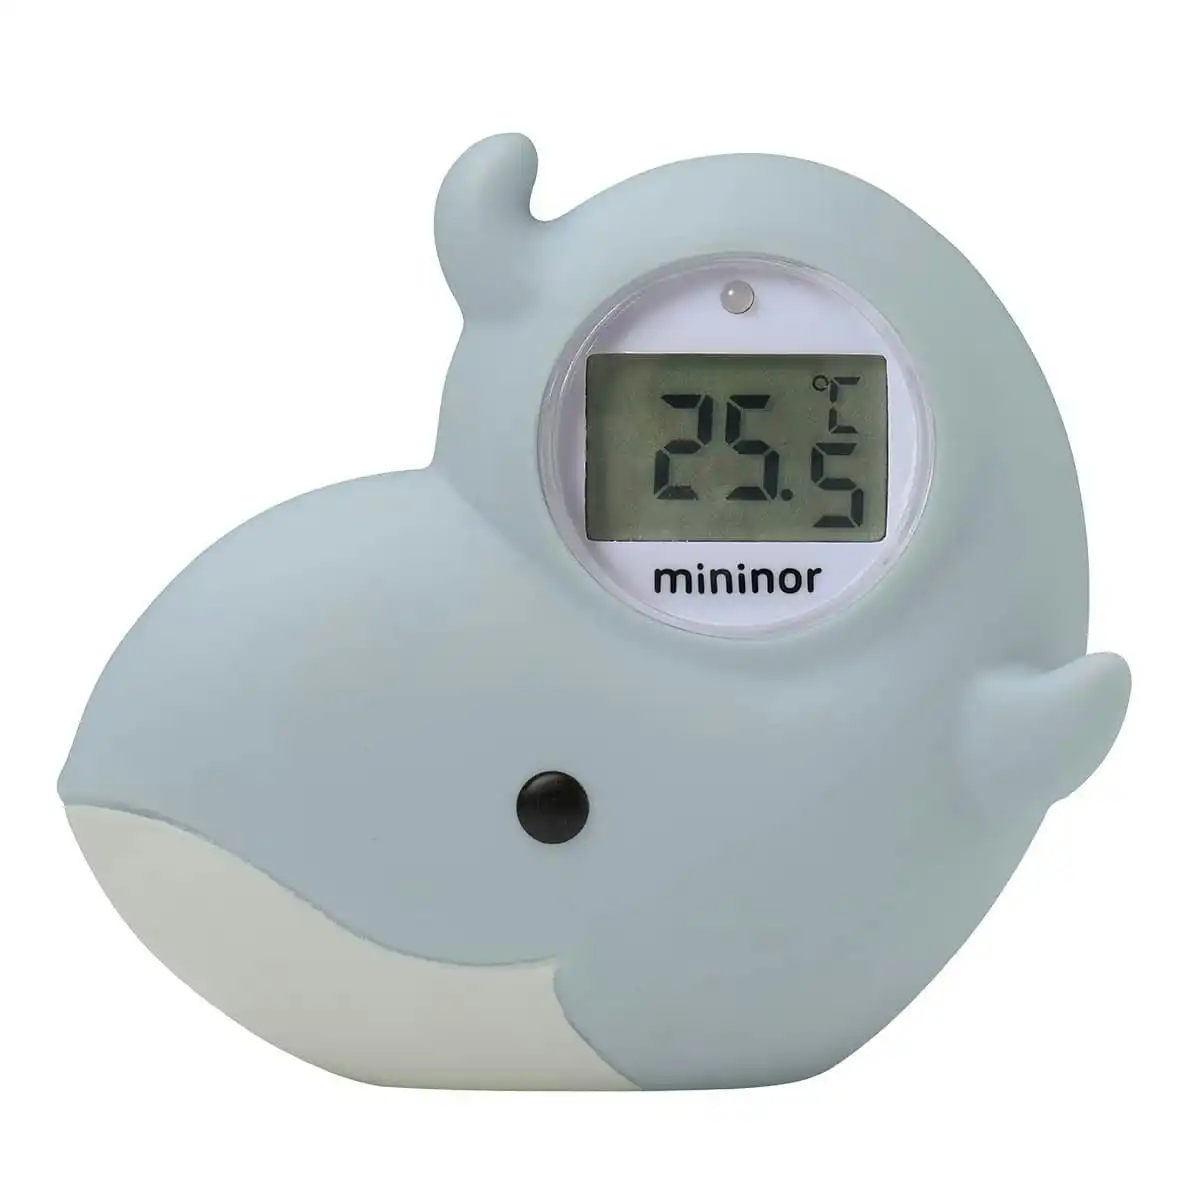 Mininor Baby/Infant Bath/Shower Animal Toy Water Safety Thermometer Grey Whale